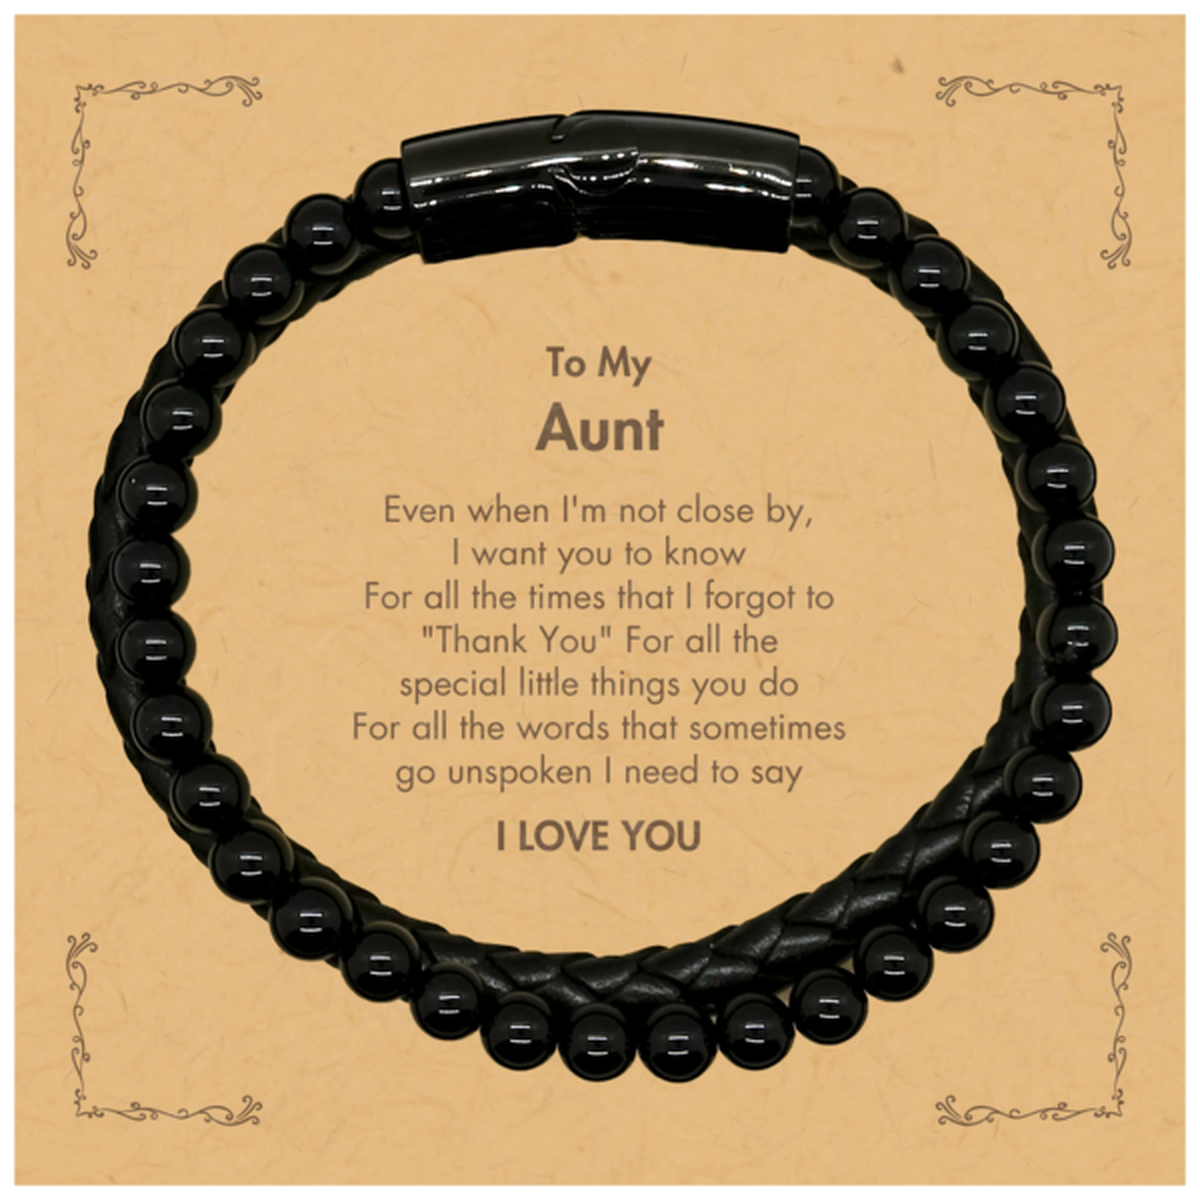 Thank You Gifts for Aunt, Keepsake Stone Leather Bracelets Gifts for Aunt Birthday Mother's day Father's Day Aunt For all the words That sometimes go unspoken I need to say I LOVE YOU